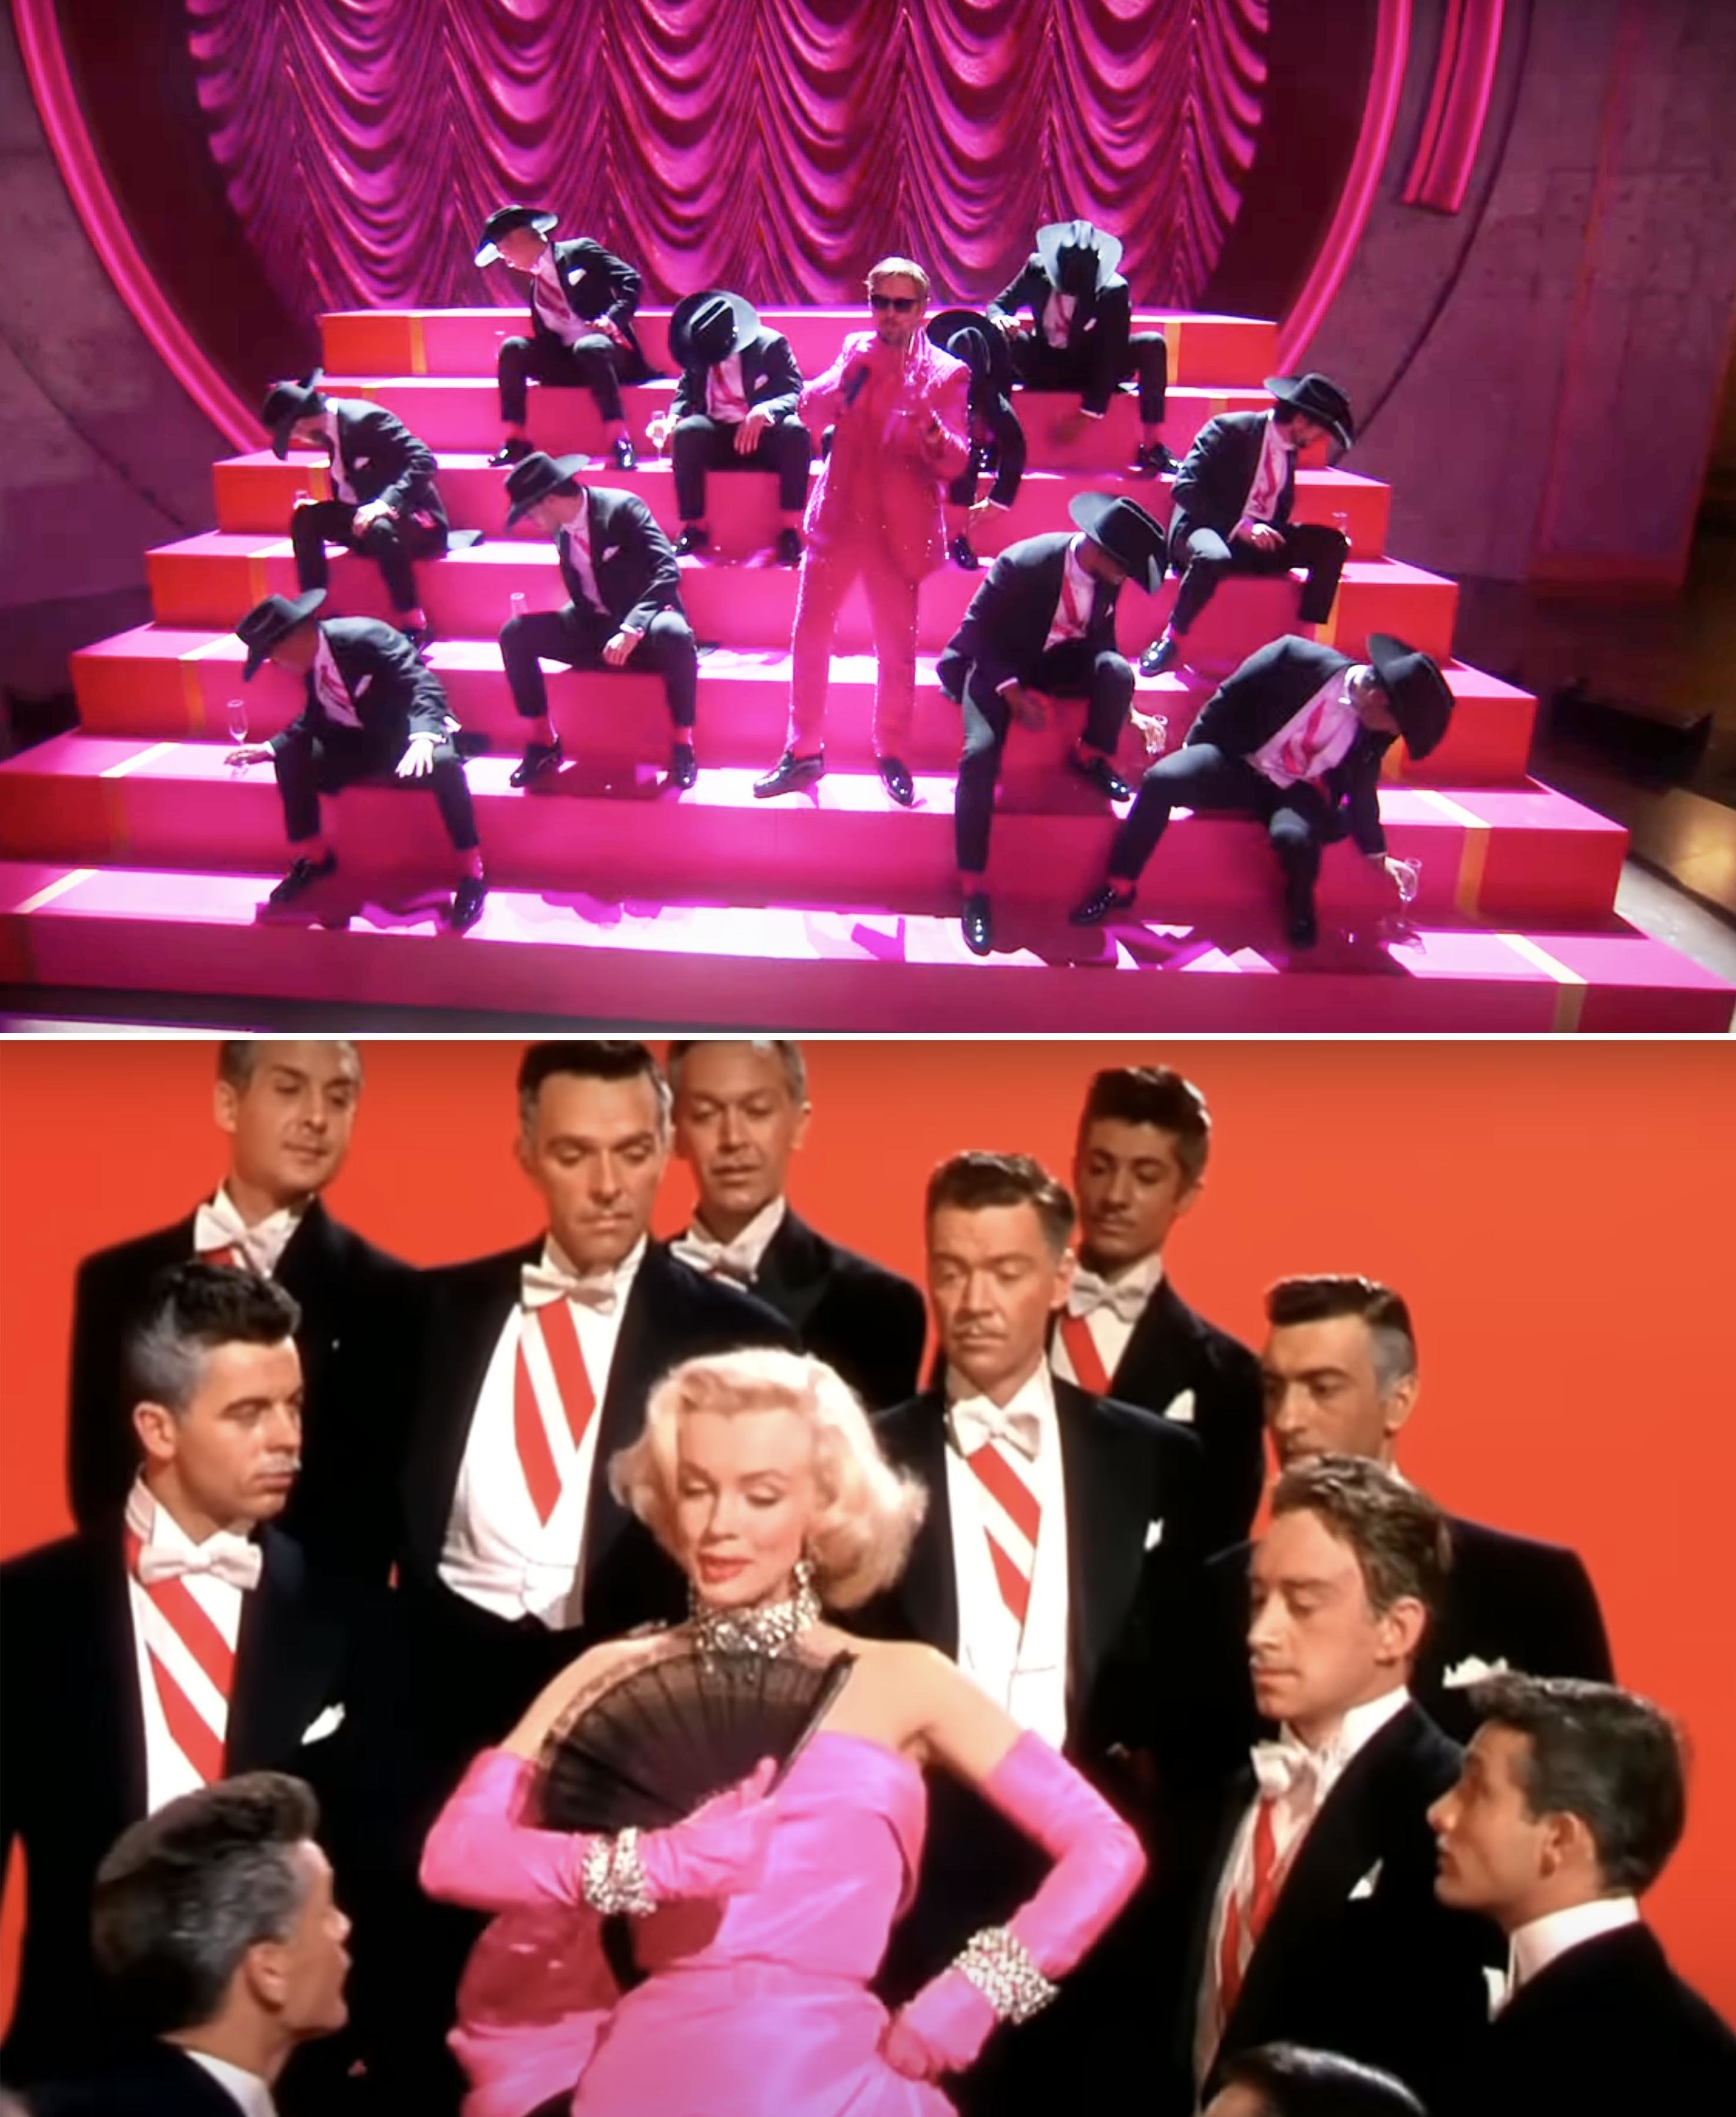 Marilyn Monroe in a pink dress surrounded by men in suits and bow ties in the iconic movie scene